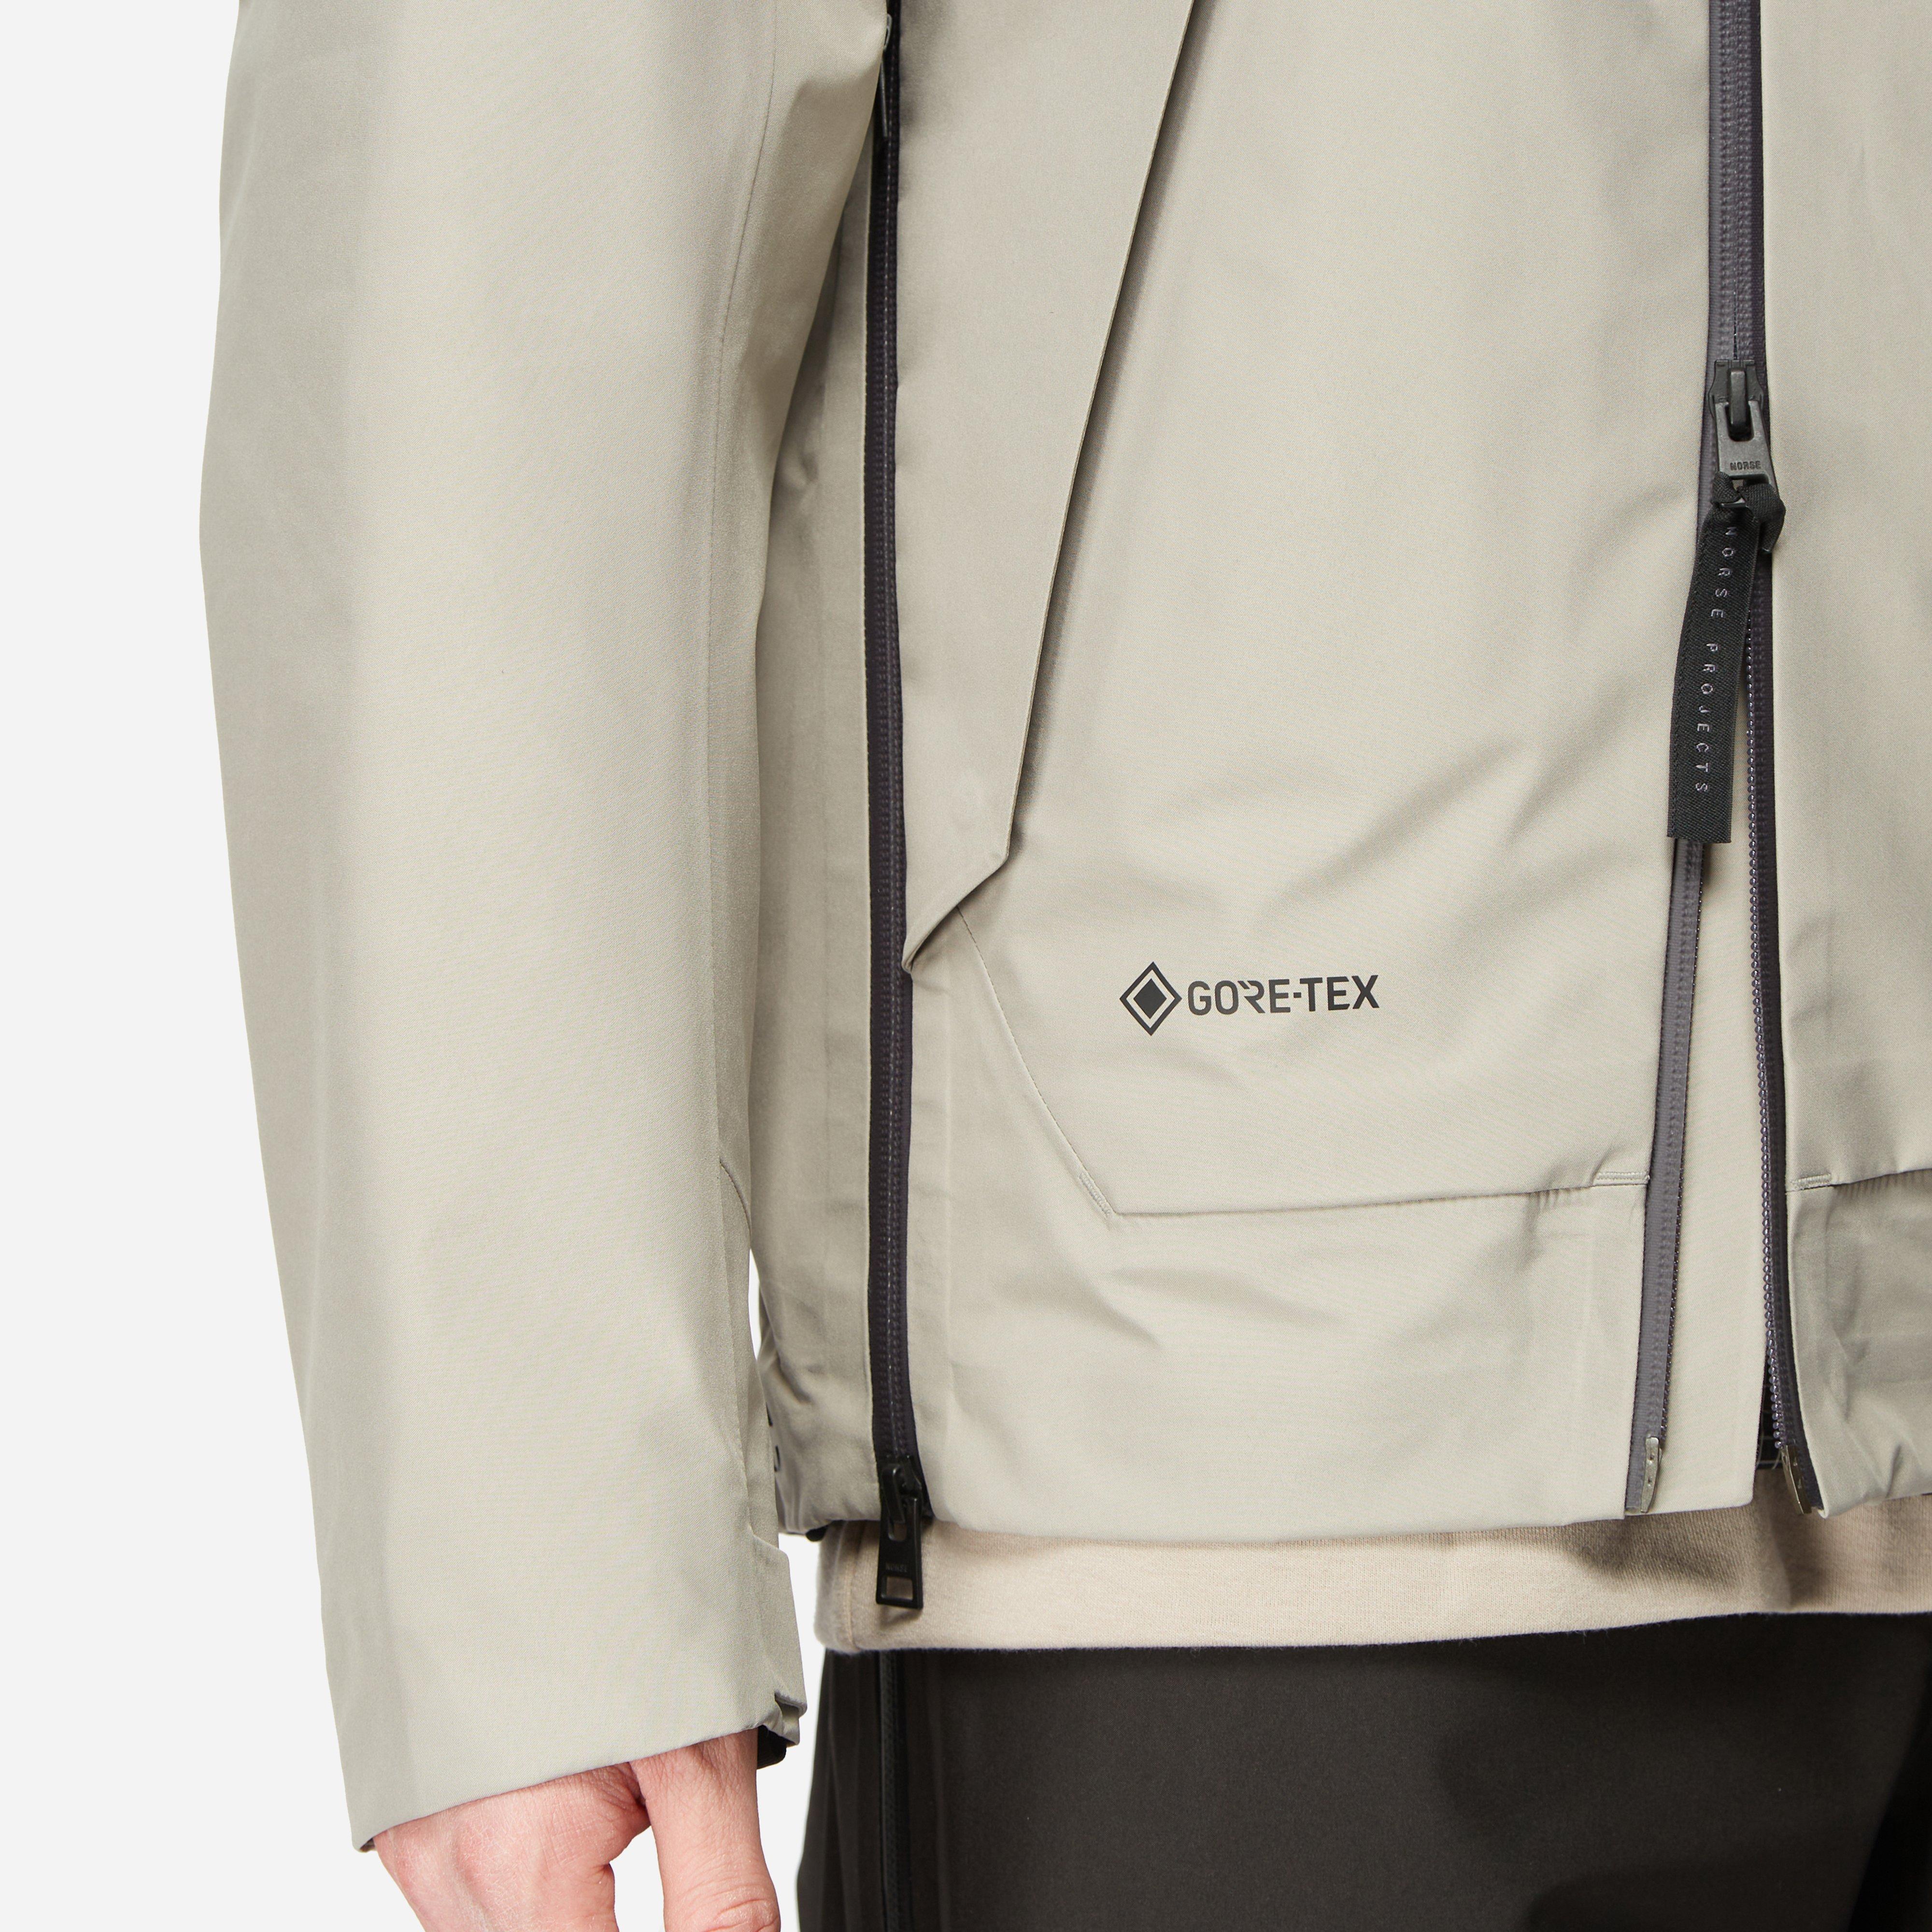 Norse Projects Gore-tex 3l Stand Collar Jacket in Natural for Men